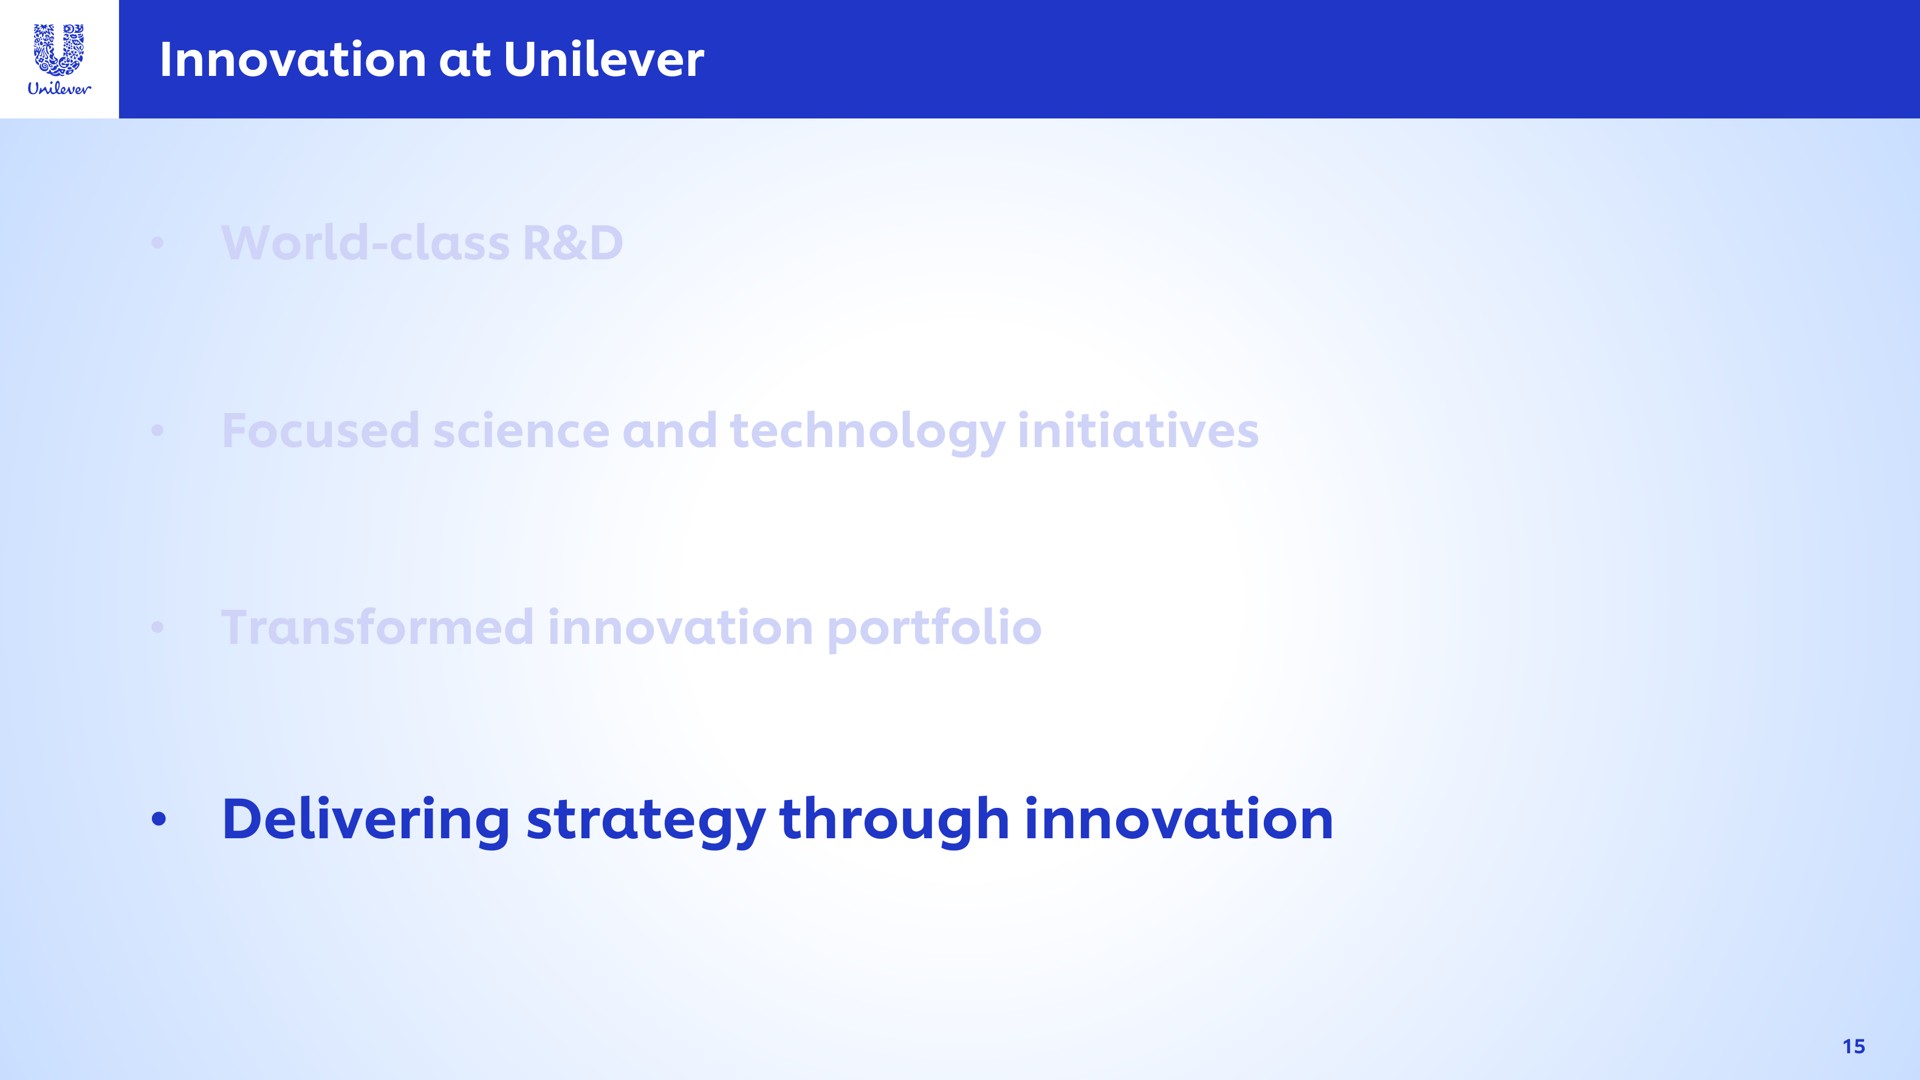 innovation at world class focused science and technology initiatives transformed innovation portfolio delivering strategy through innovation | Unilever